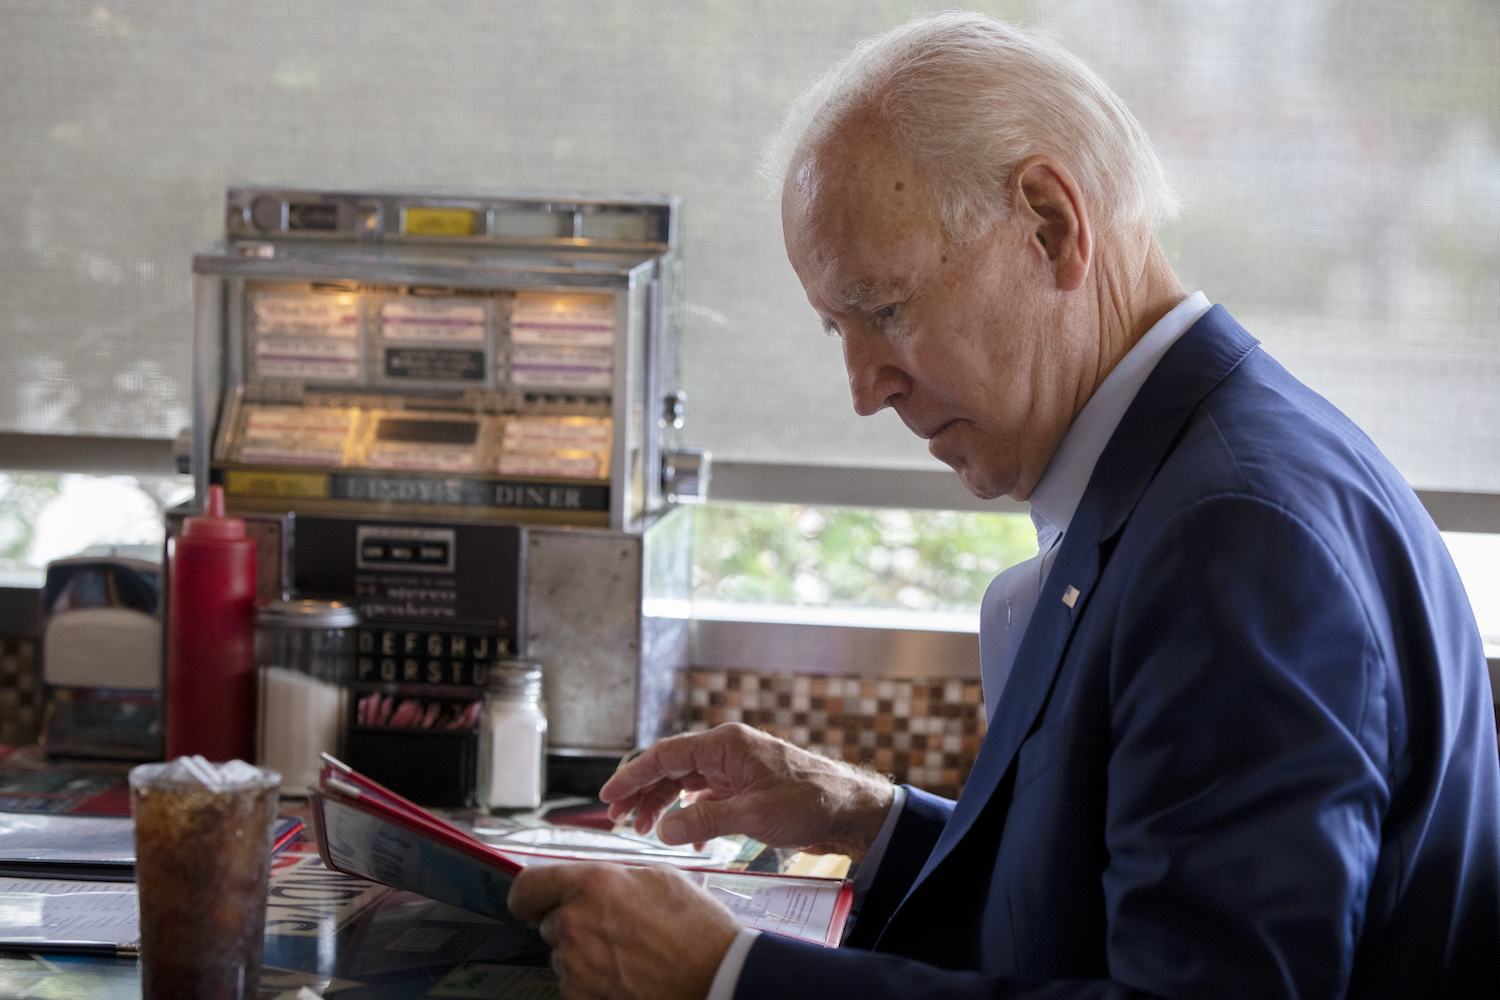 Democratic presidential candidate former Vice President Joe Biden looks at a menu during a campaign stop at Lindy's Diner in Keene N.H., Saturday, Aug. 24, 2019. October 2020